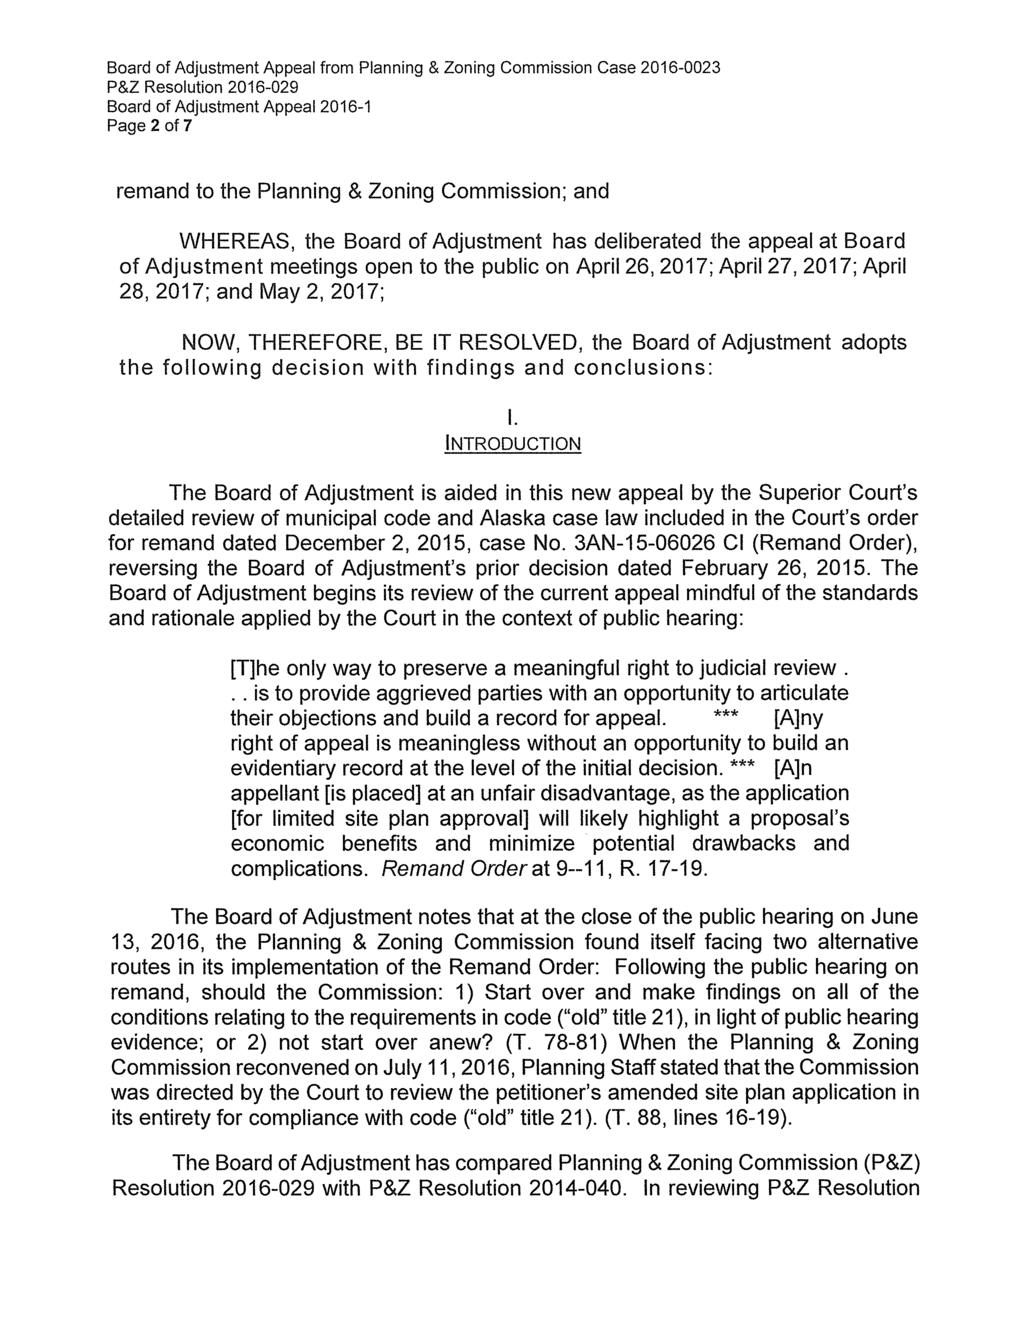 Page 2 of 7 remand to the Planning & Zoning Commission; and WHEREAS, the Board of Adjustment has deliberated the appeal at Board of Adjustment meetings open to the public on April 26, 2017; April 27,